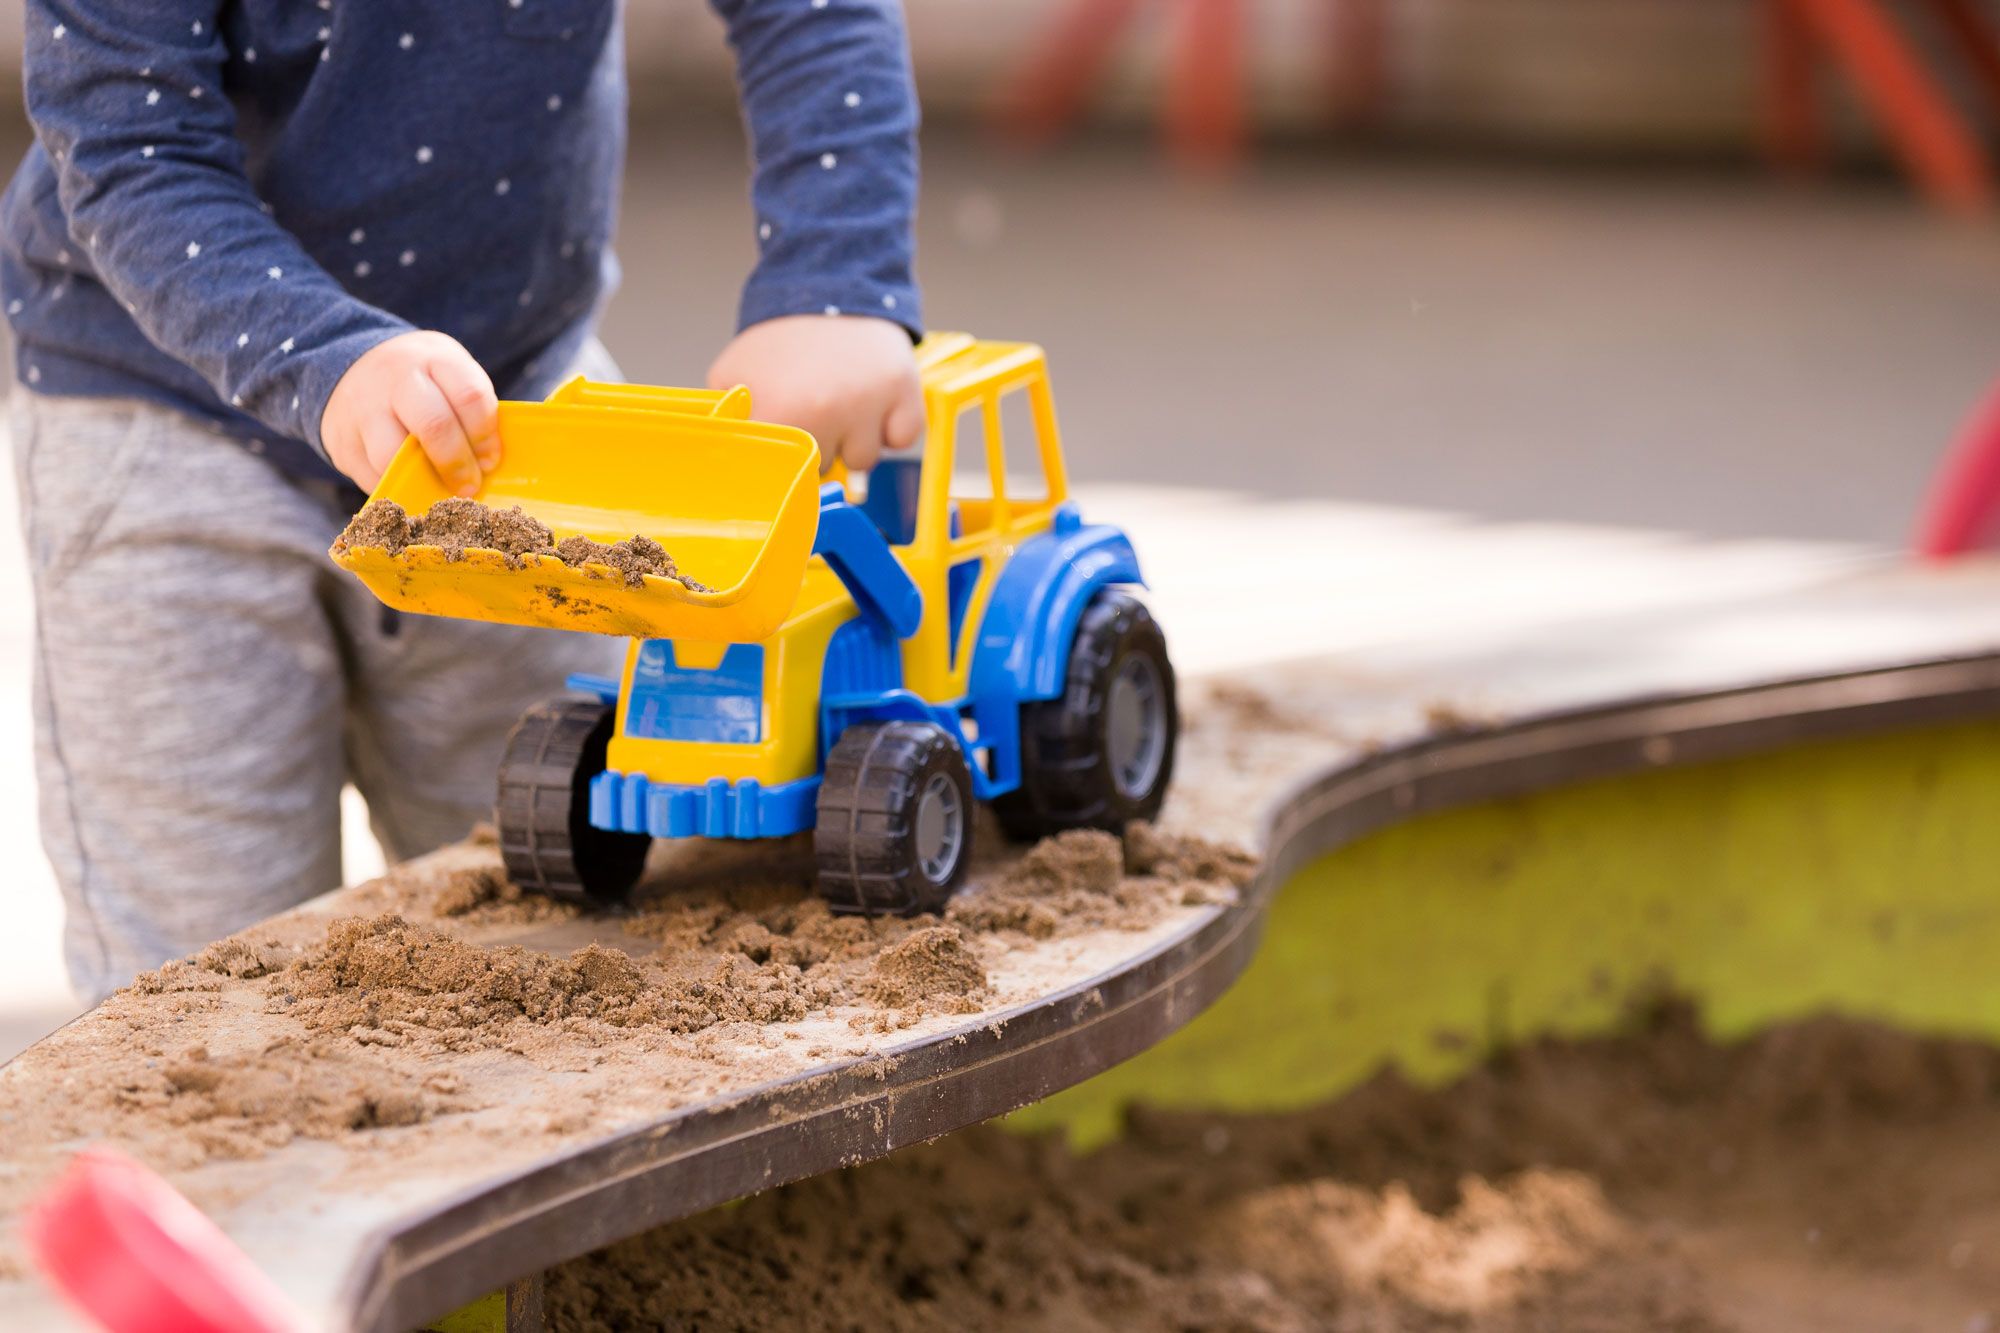 A child playing in sand with a digger